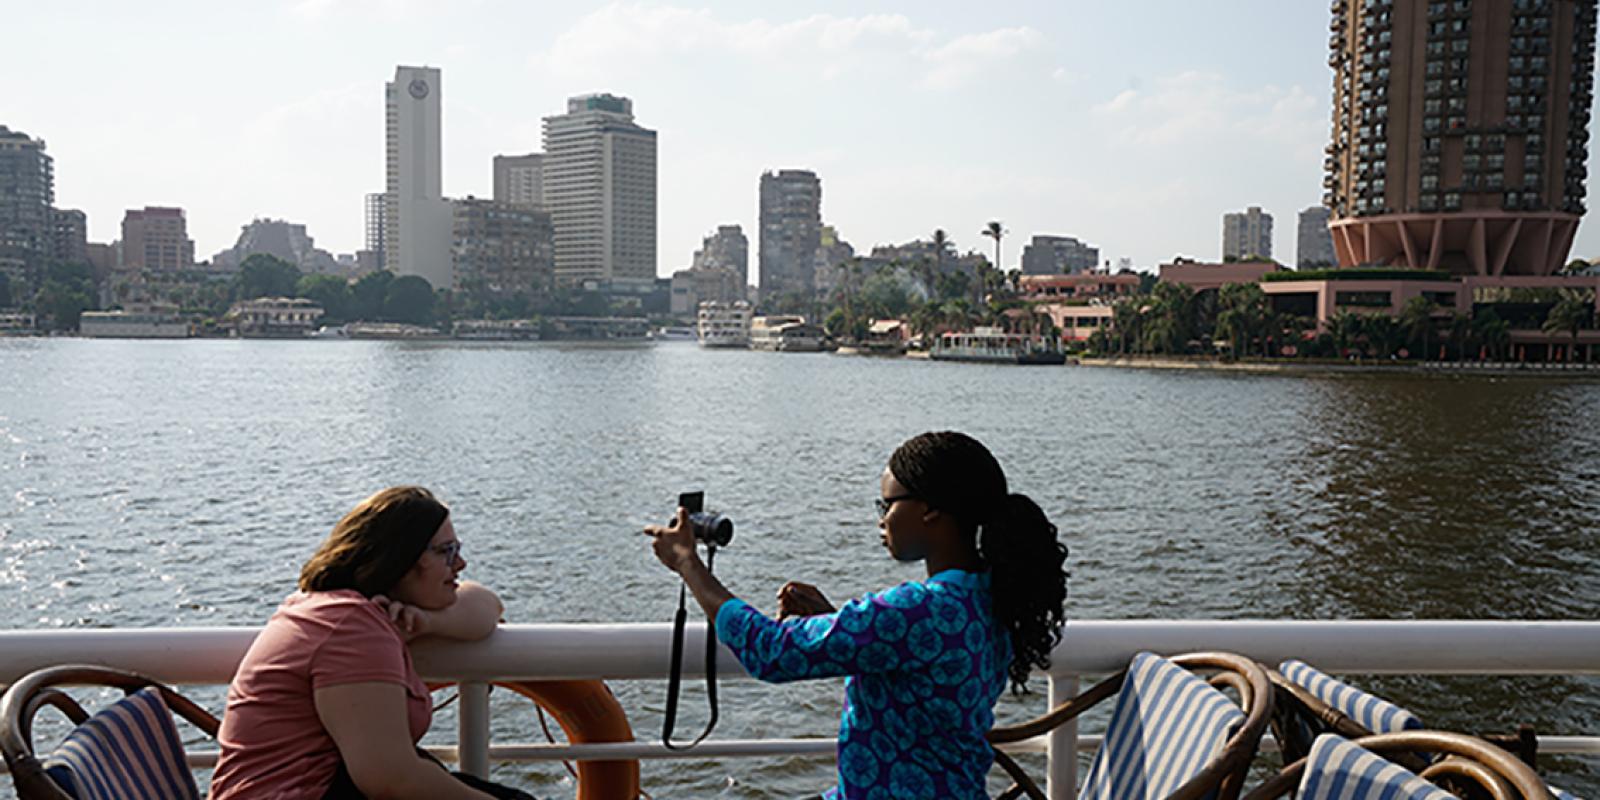 A girl taking picture of another girl using a camera by the nile